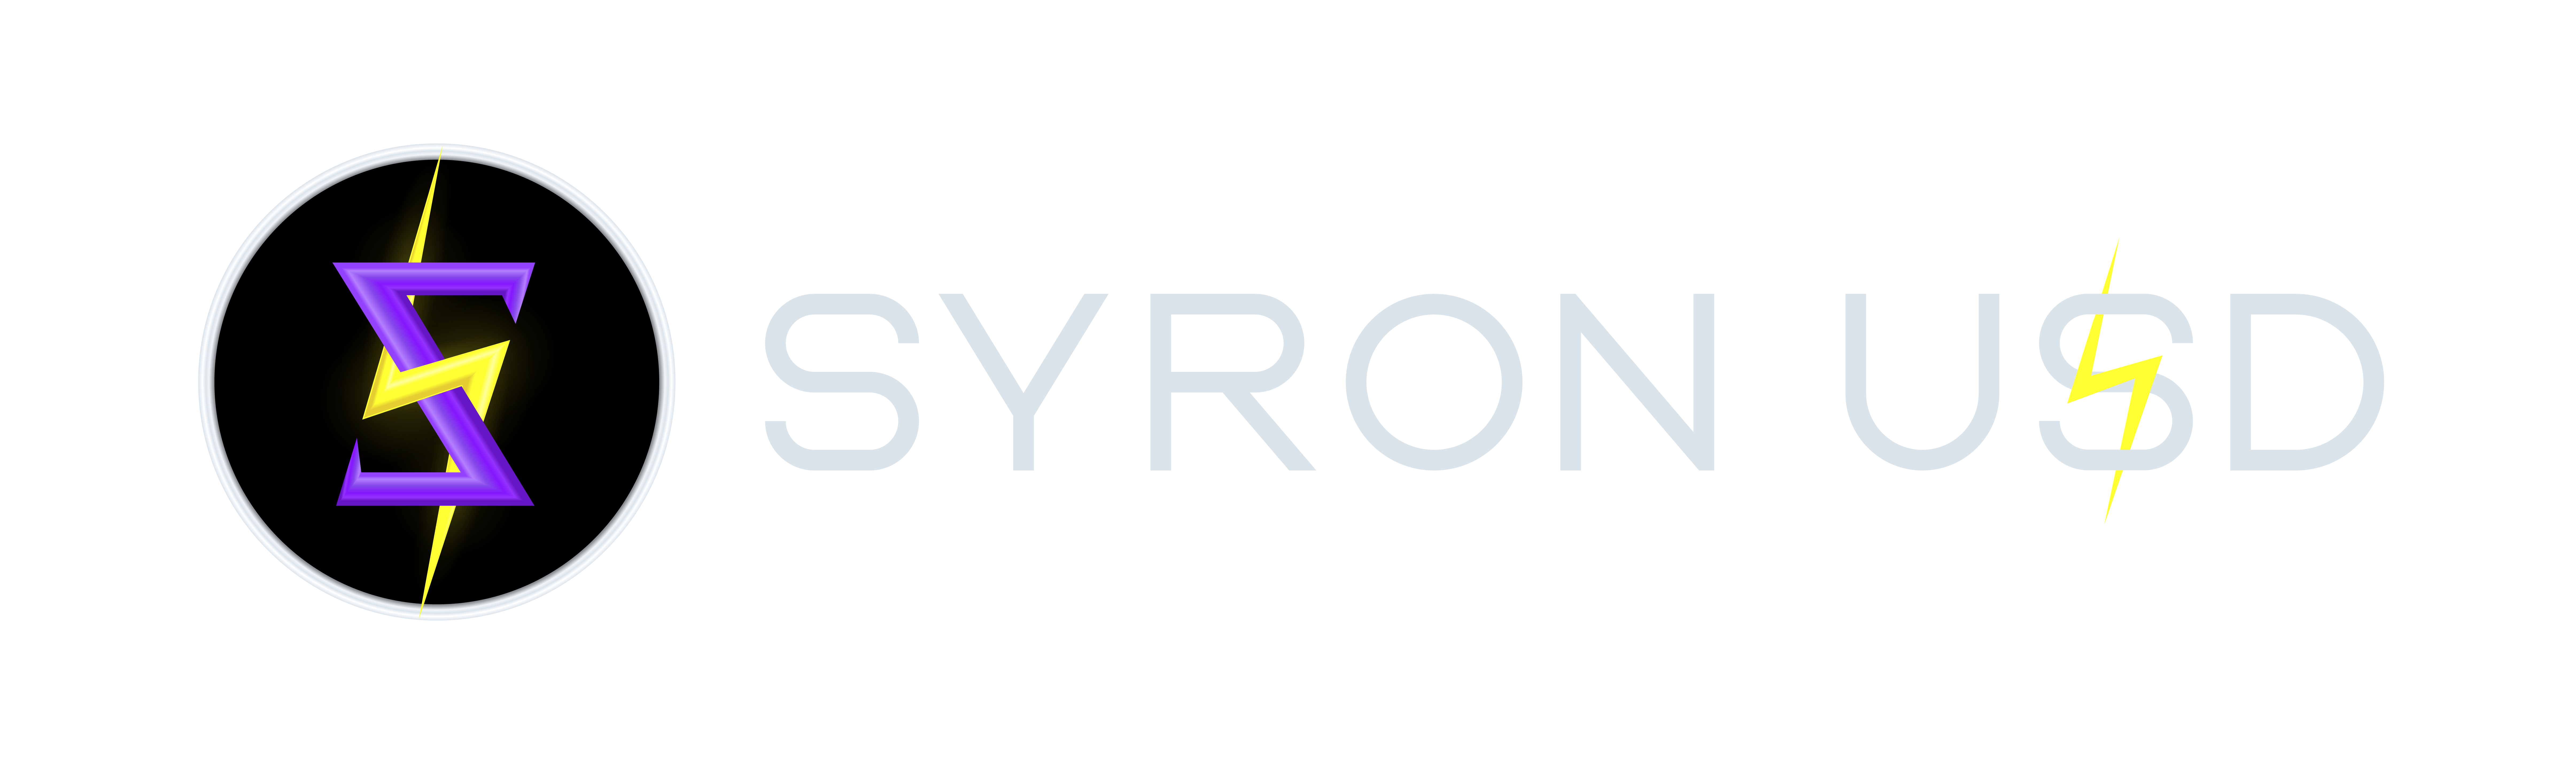 ssi_syronU$D_isologotipo_H.png